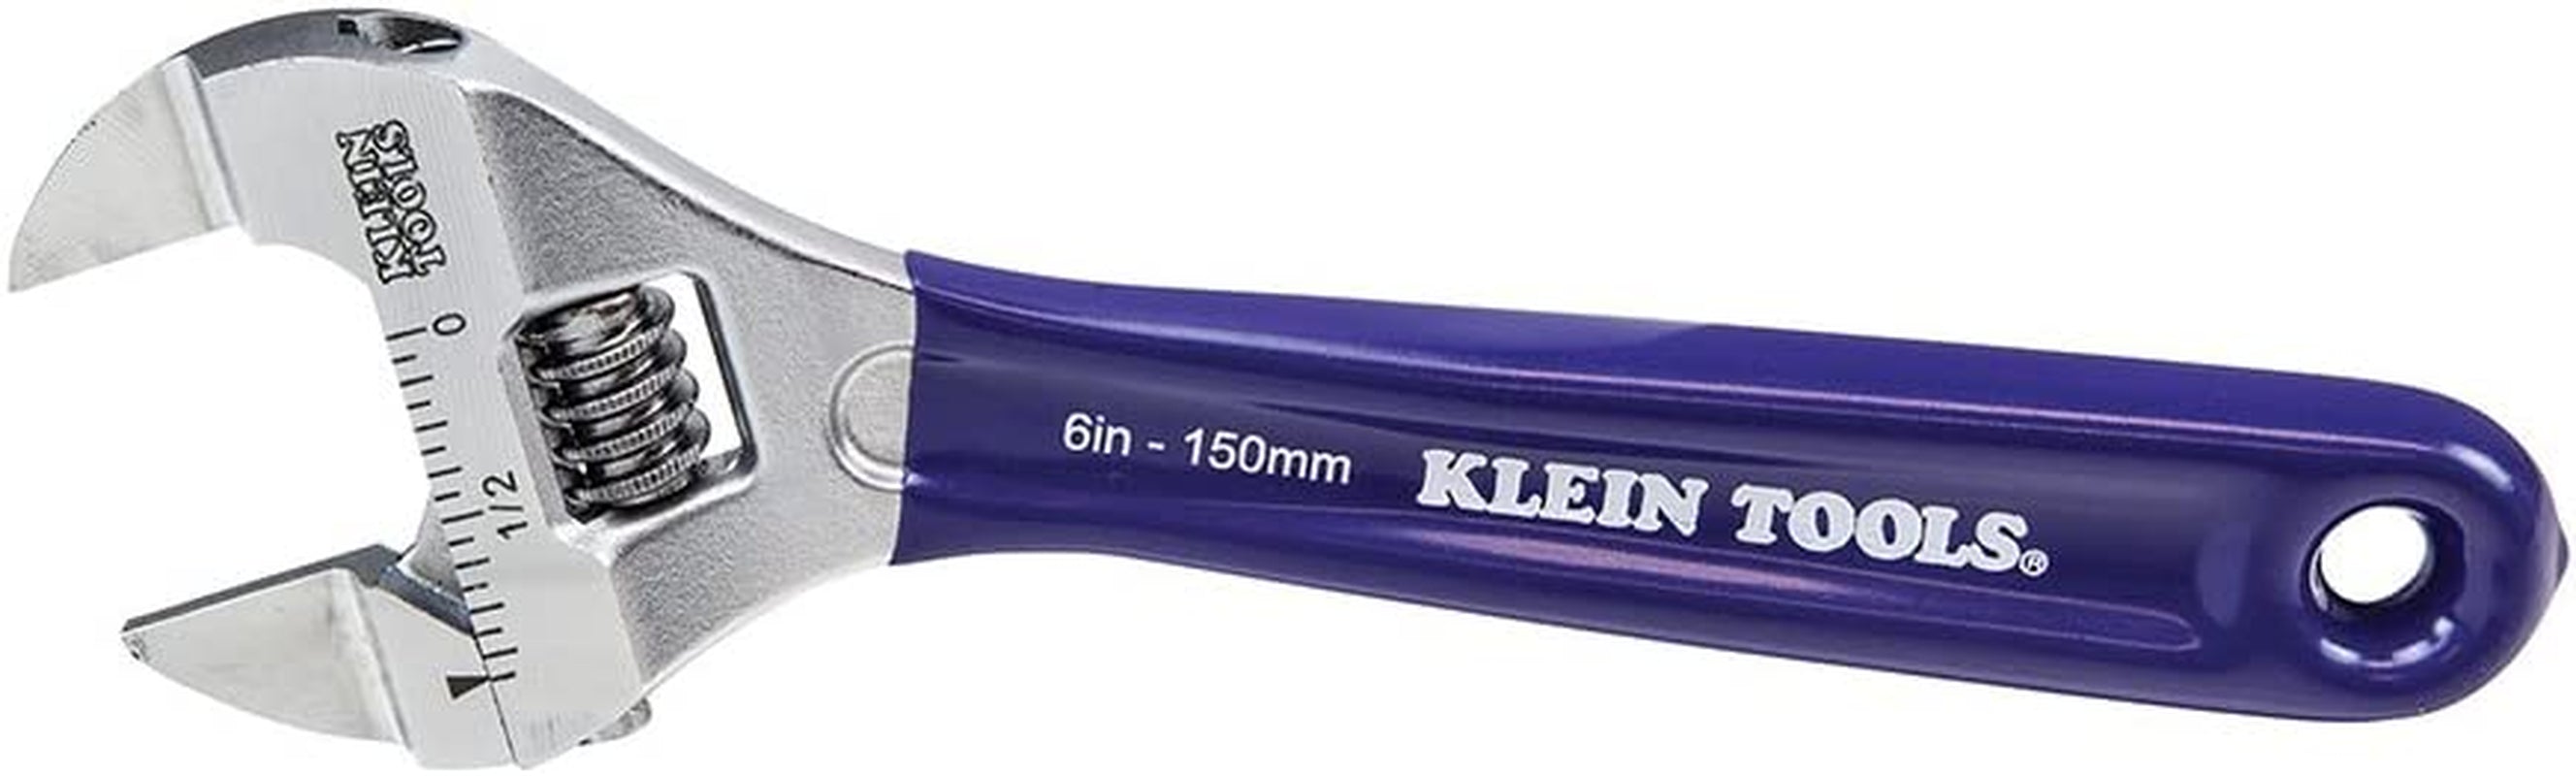 KLEIN TOOLS, Klein Tools D86934 Adjustable Wrench, Forged with Slimmer Jaw and a High Polish Chrome Finish, 6-Inch